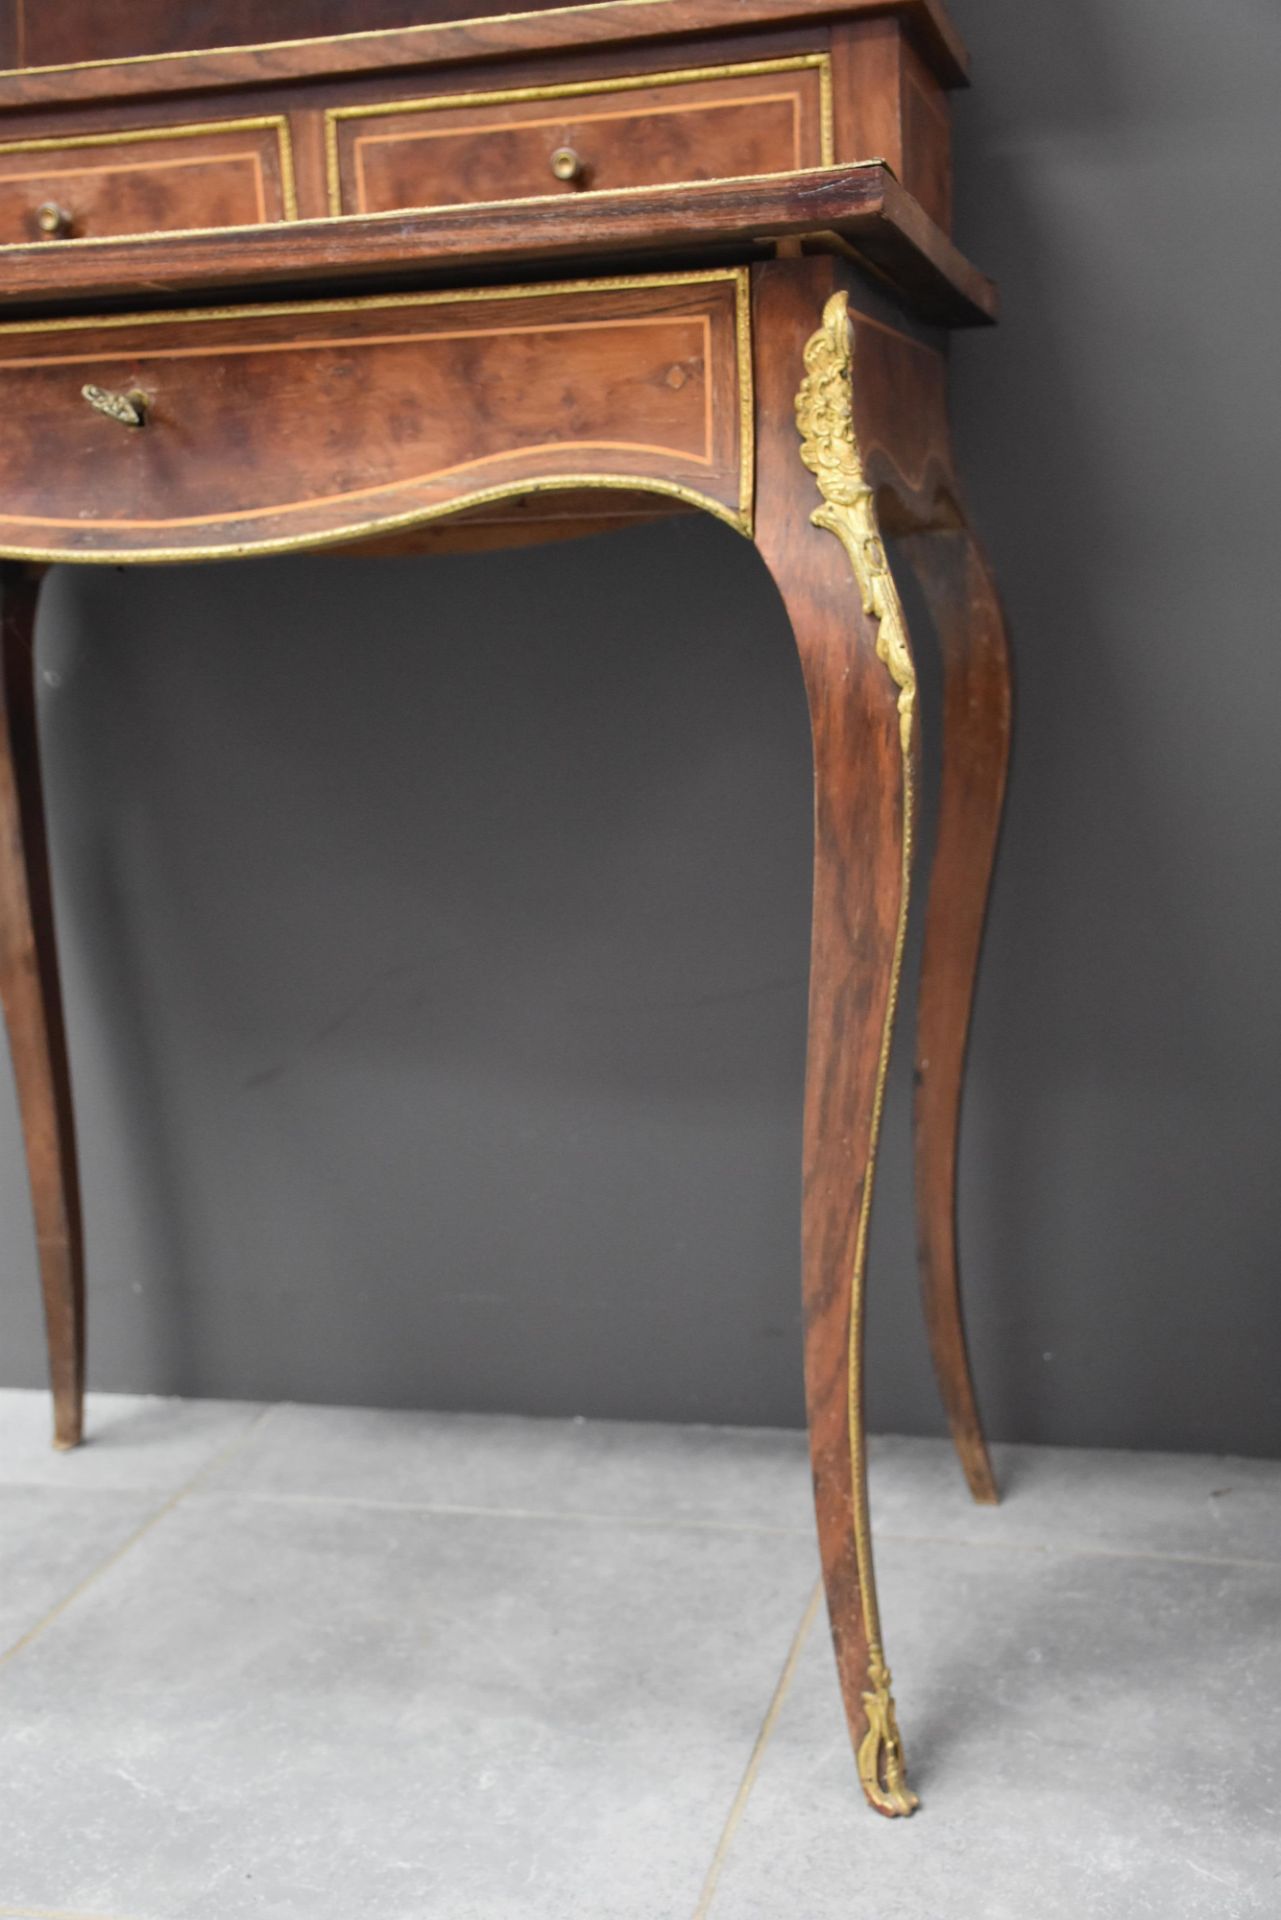 Napoleon III style stepped lady's desk. French work in veneer and bronze ornaments. Height: 116 cm. - Image 2 of 7